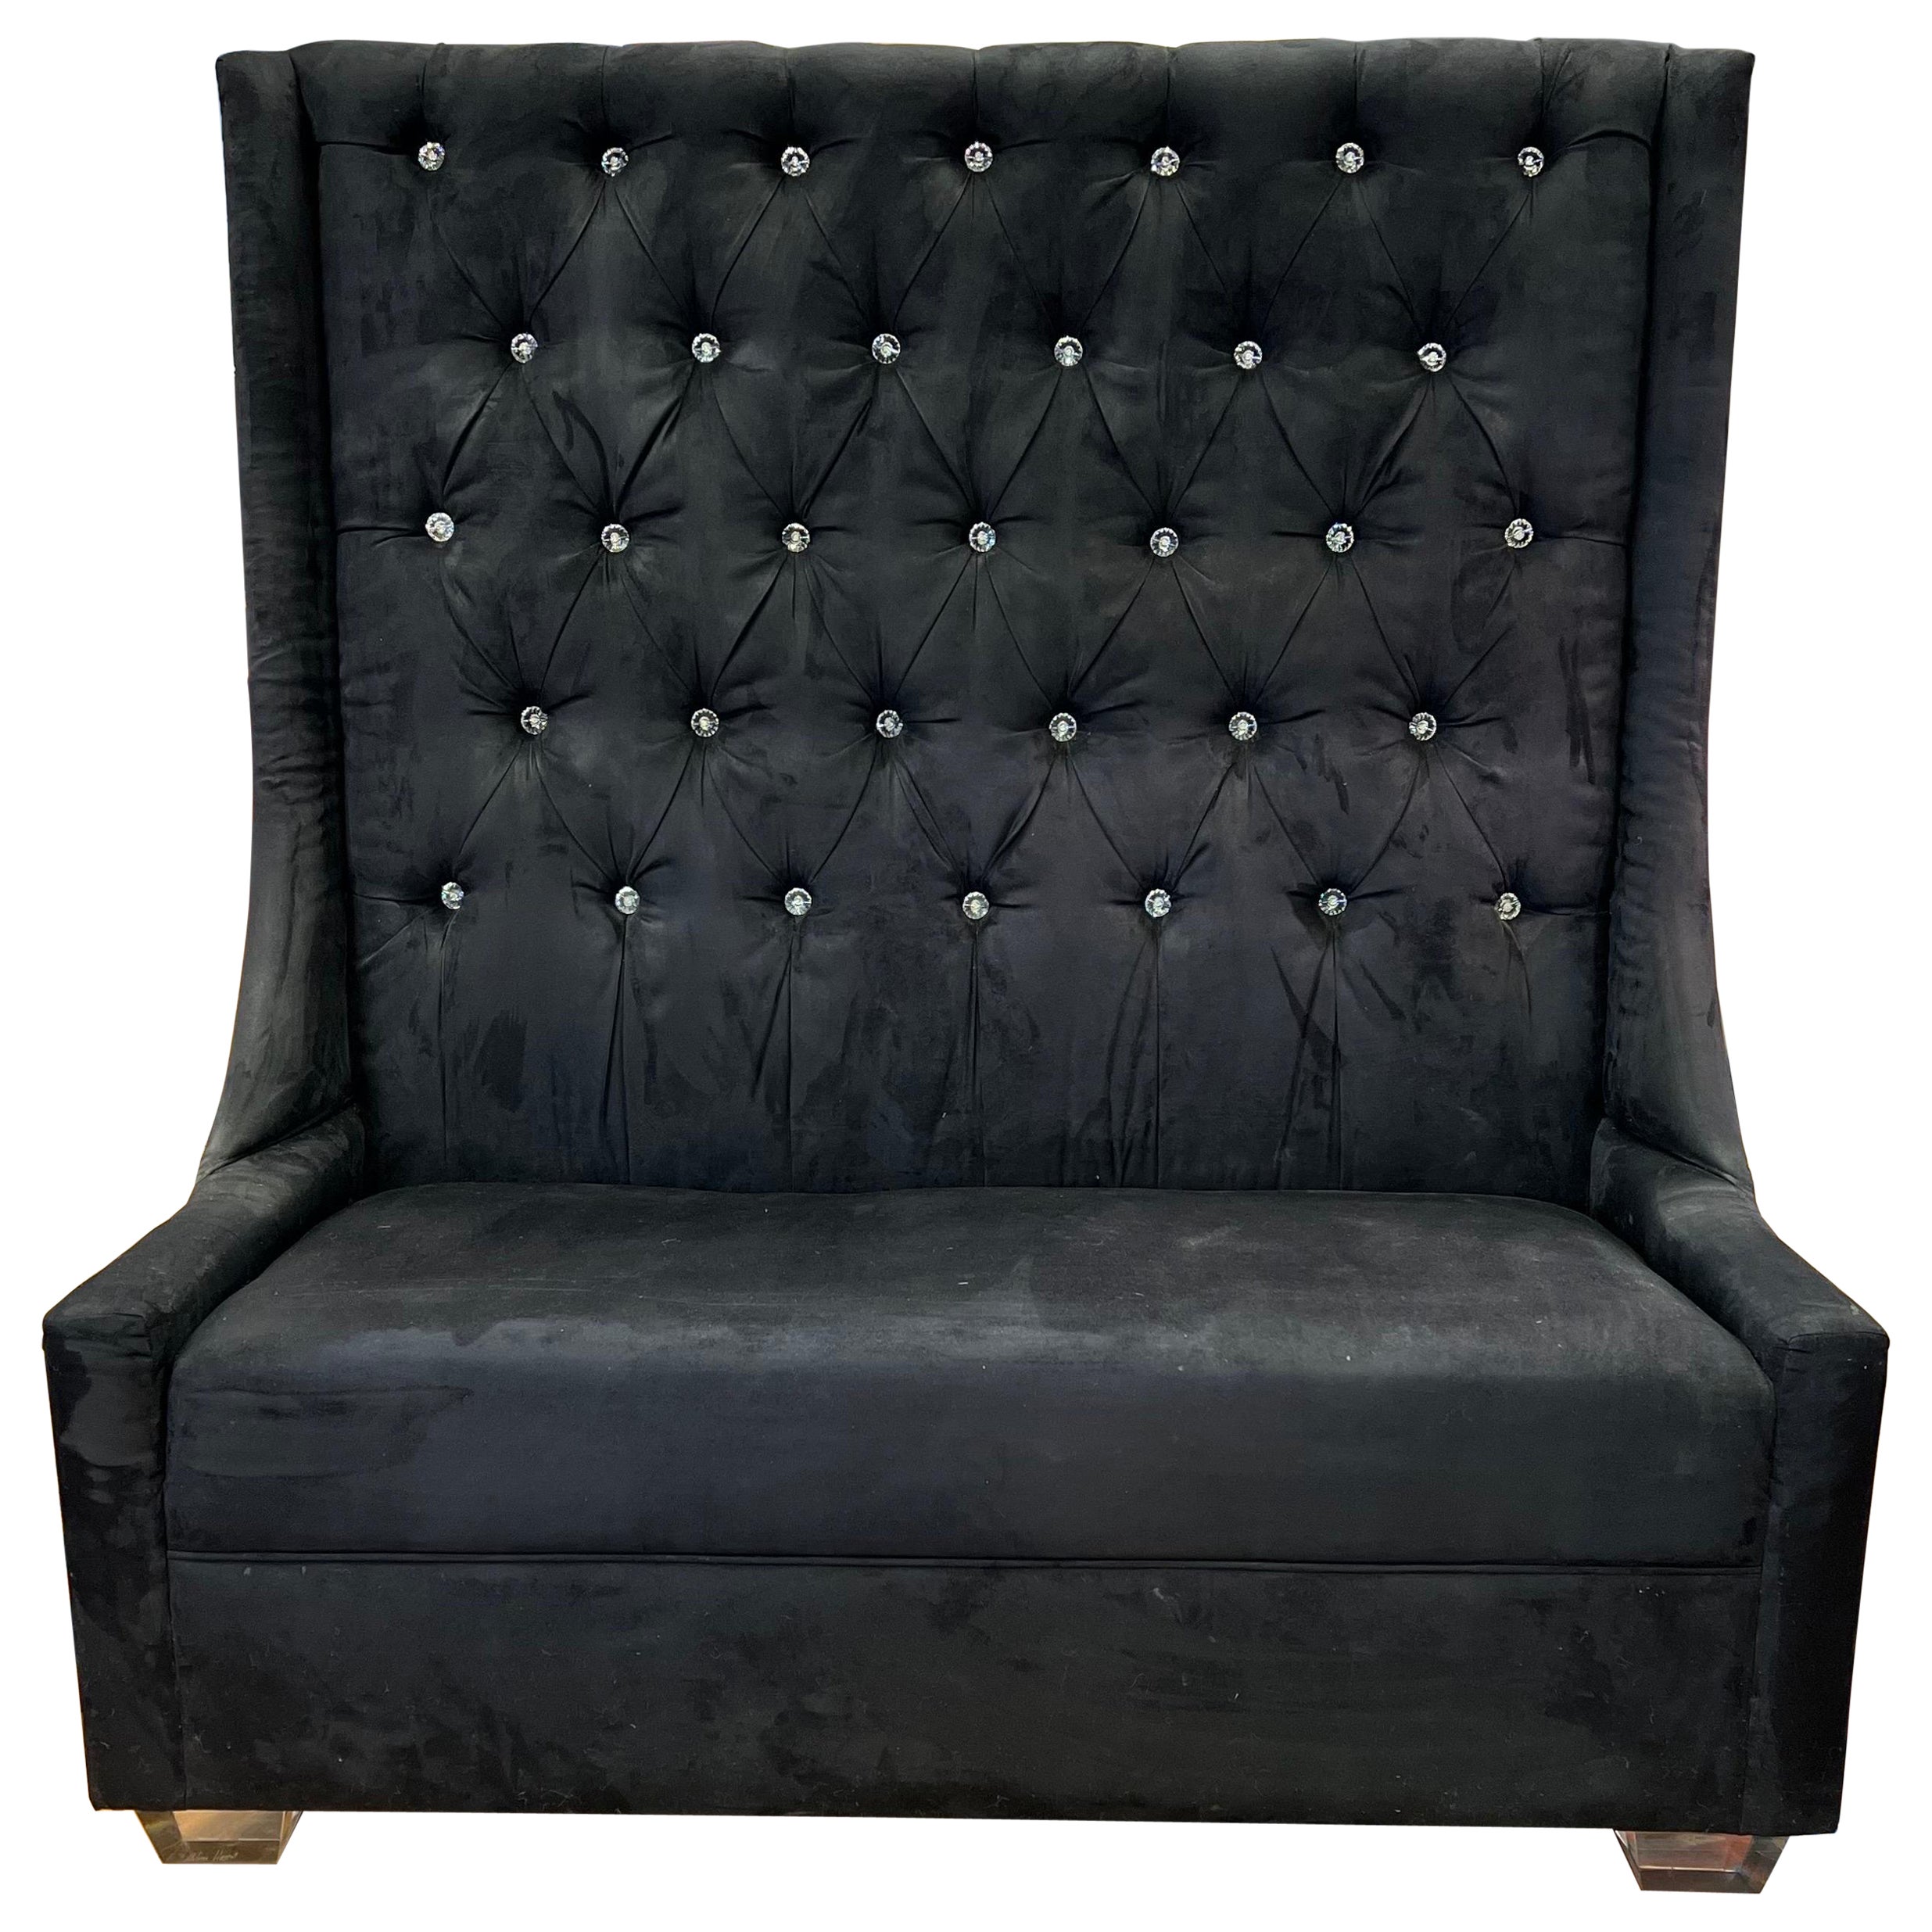 Tall Tufted Black Suede Leather Settee Sofa Banquette Loveseat by Shlomo Haziza